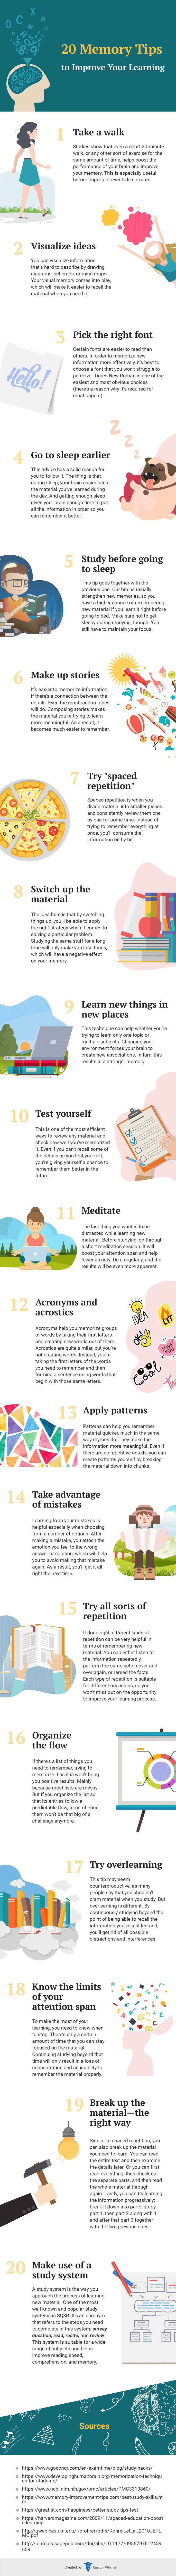 how-to-improve-brain-memory-brain-tricks-and-tips-infographic